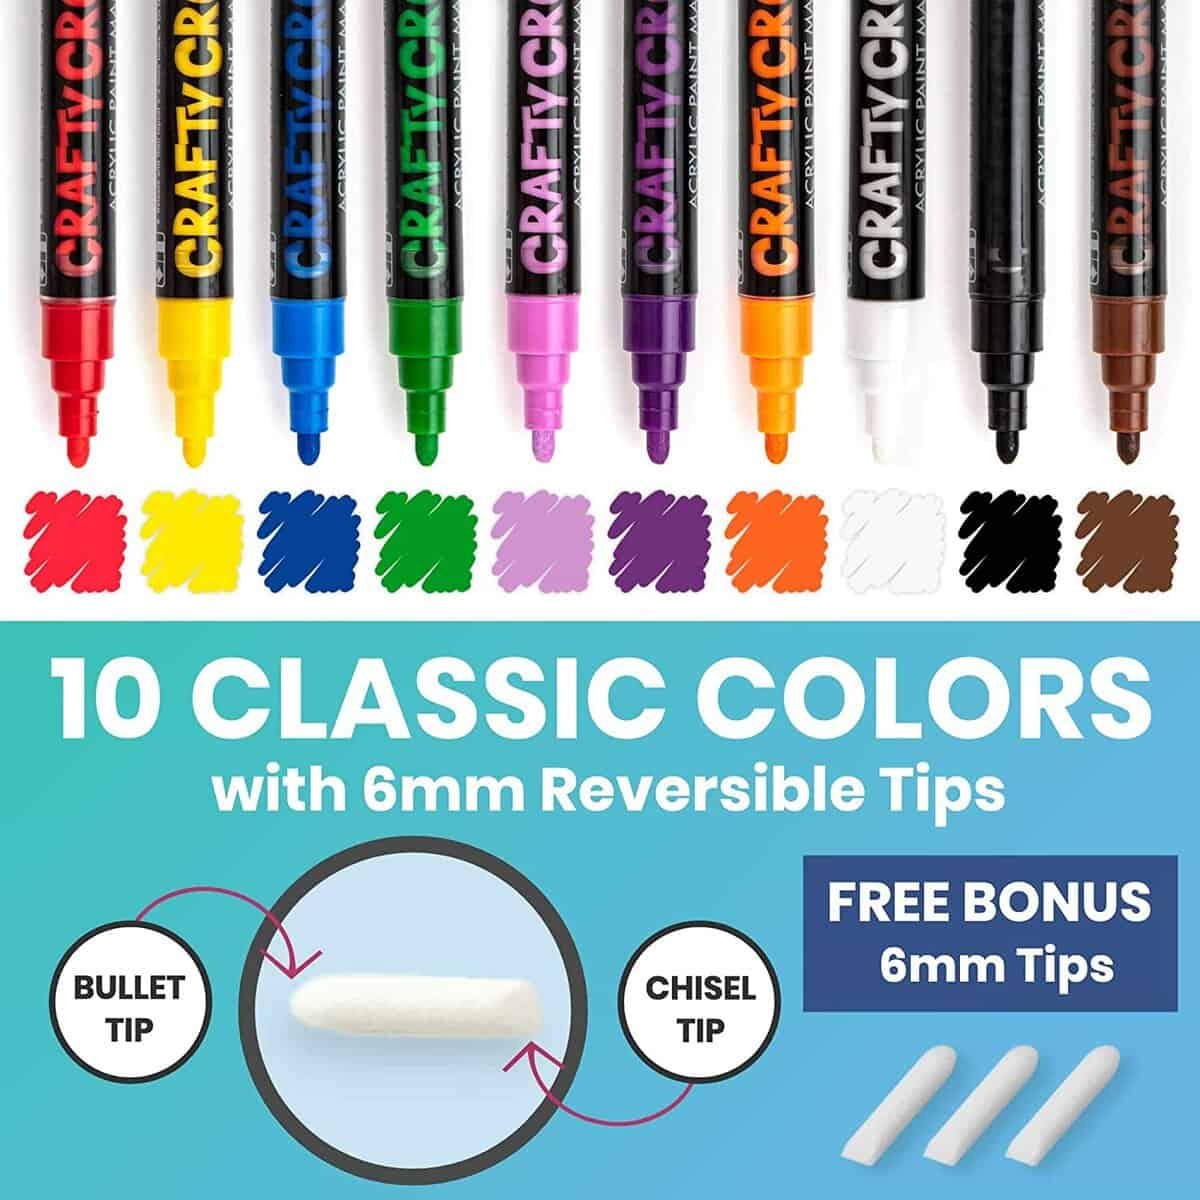 PINTAR Acrylic Paint Markers/Pens Set for Rock Painting, Wood, Glass - Pack  of 16, 1mm, 1 - Kroger